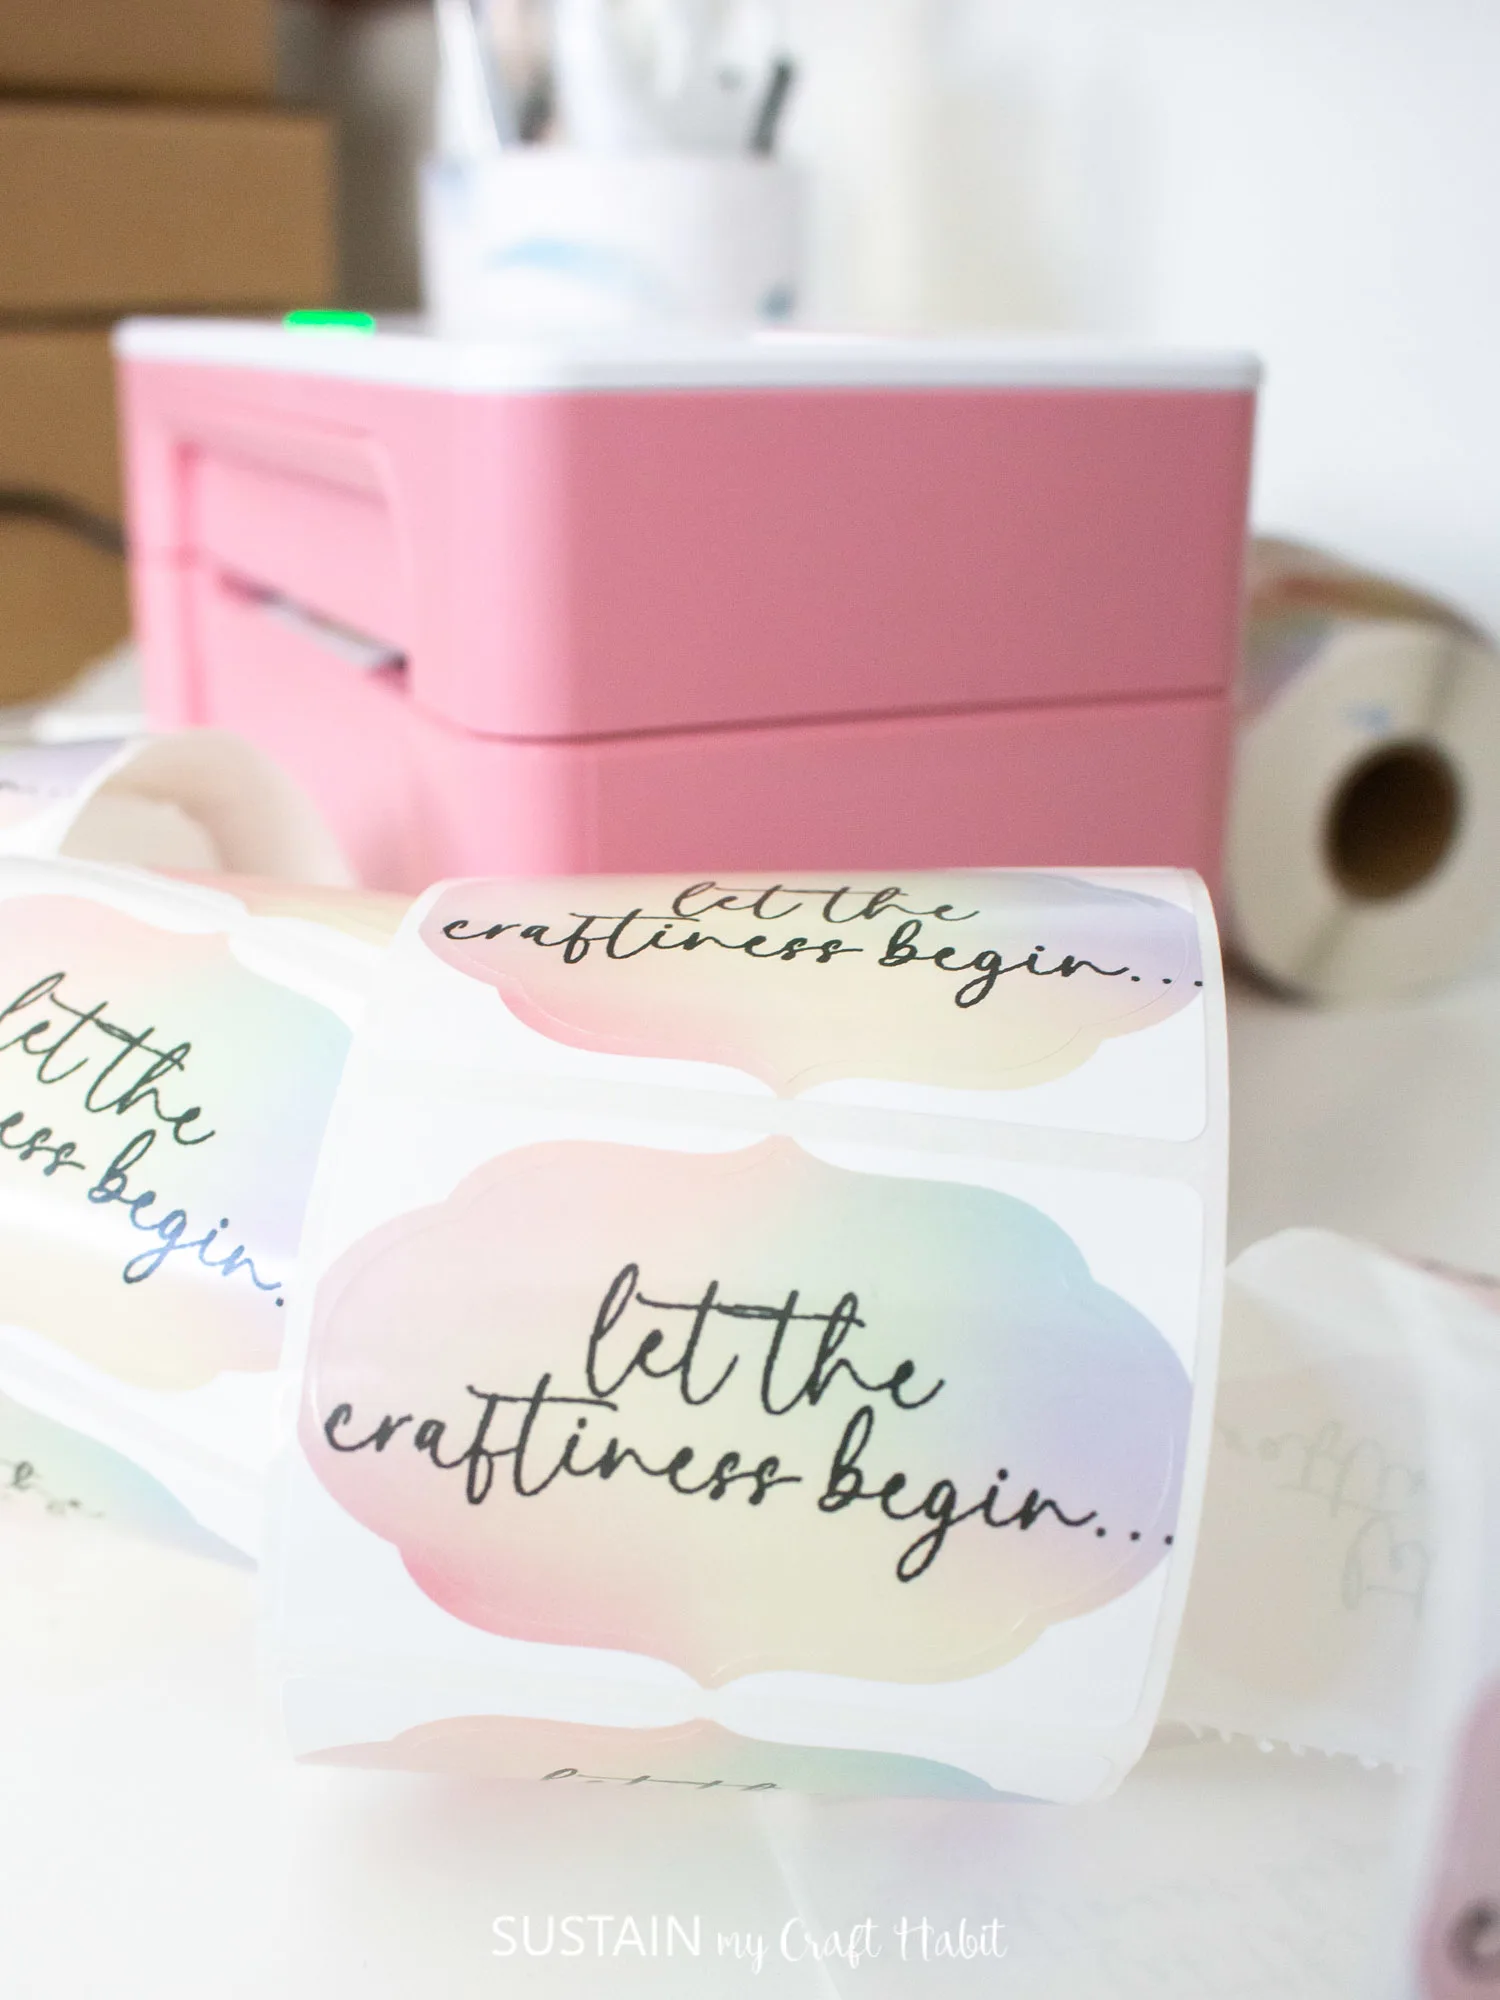 Close up image of rainbow colored sticker printed with the phrase "let the craftiness begin...".